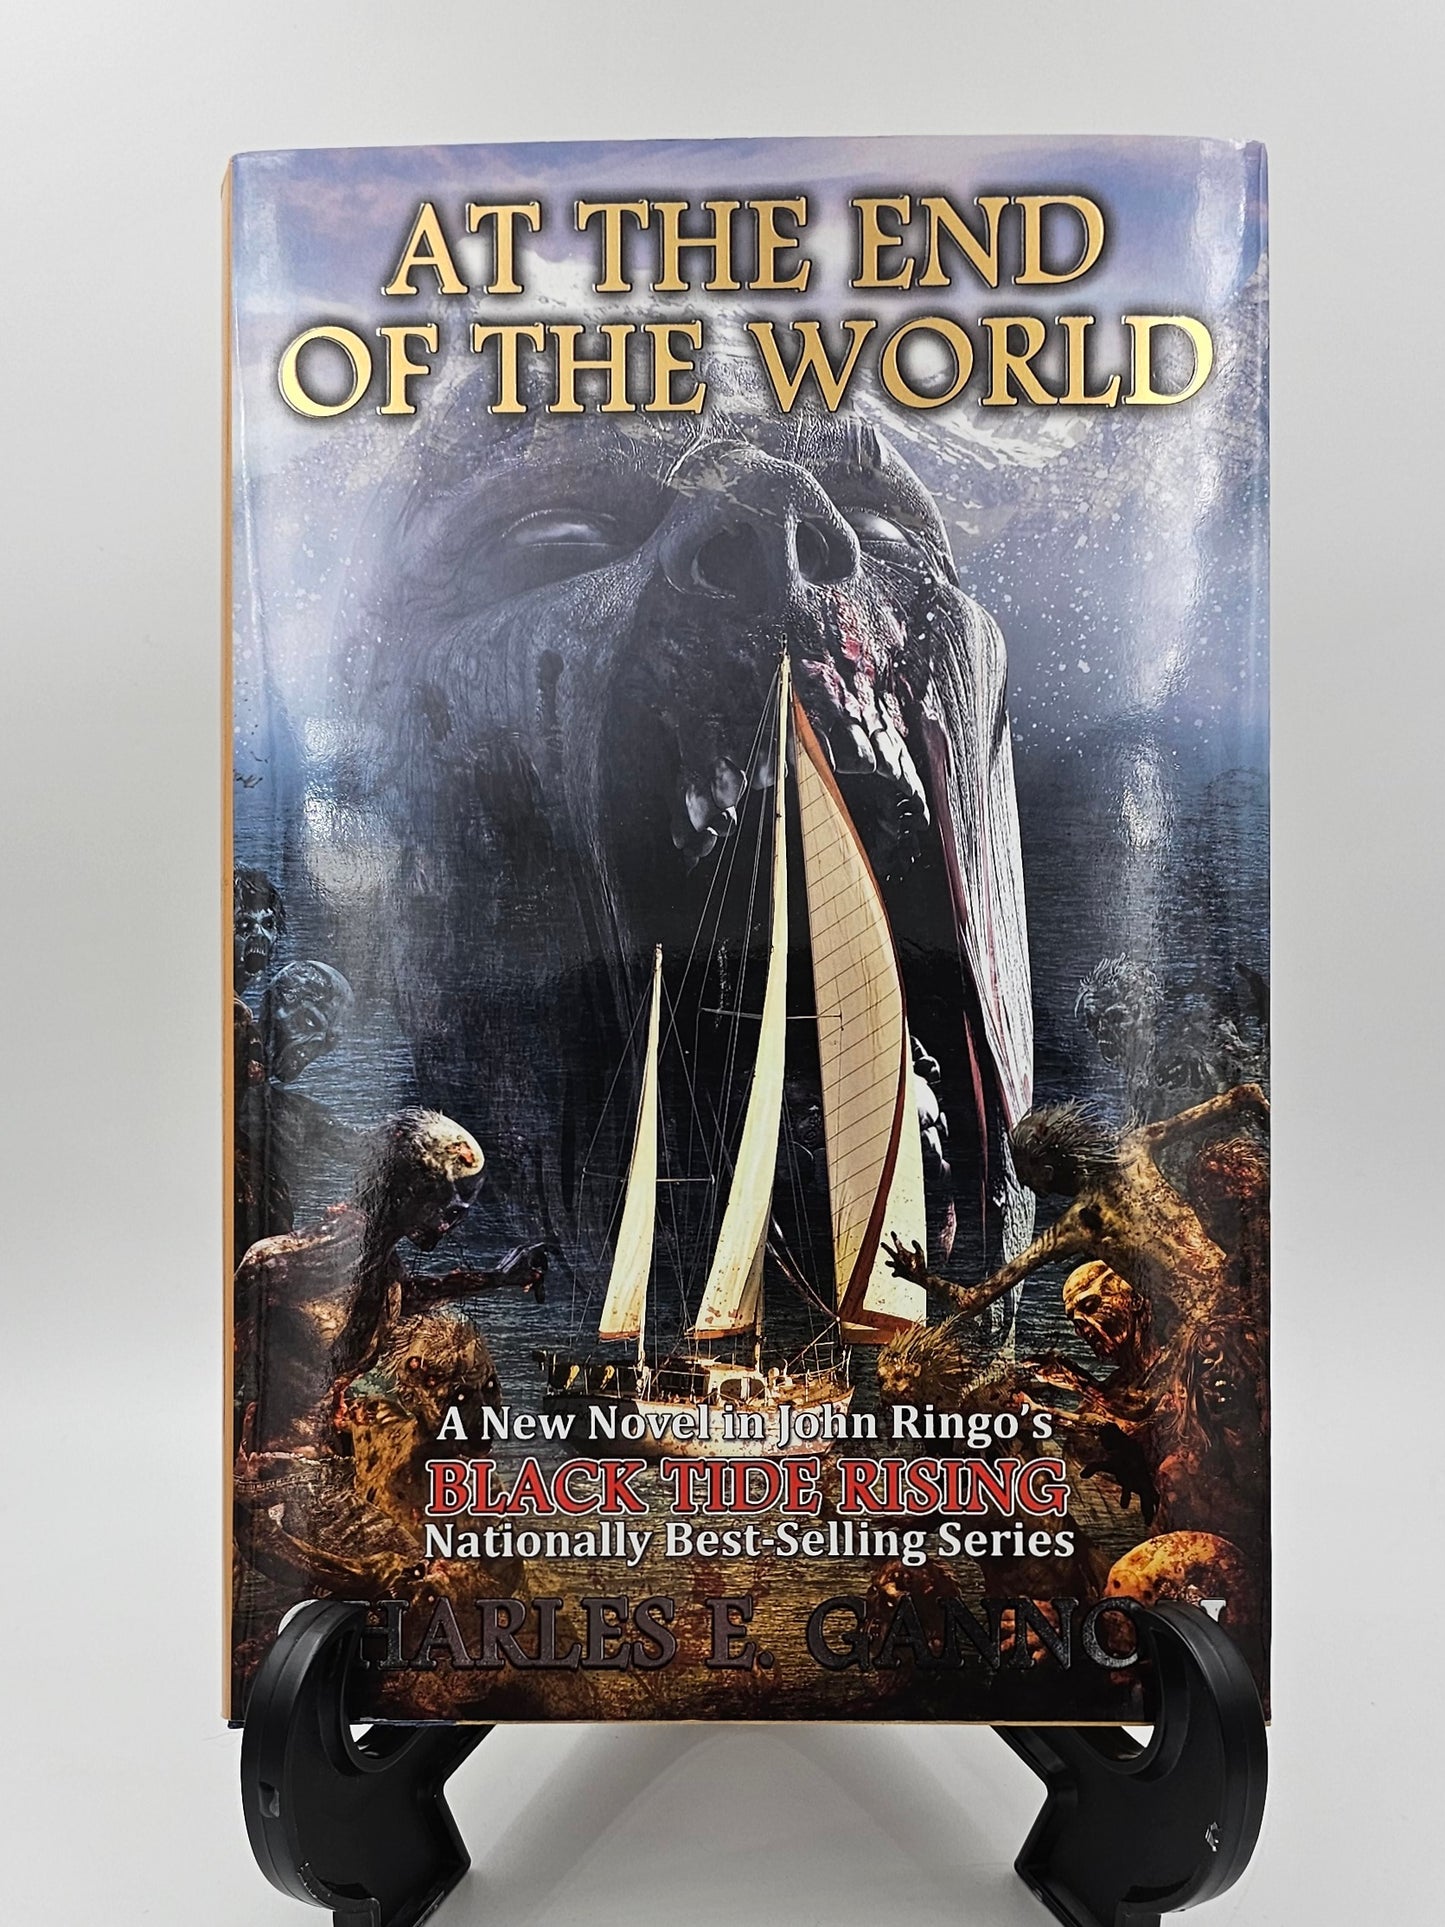 At the End of the World By: Charles E. Gannon (Black Tide Rising Series #7)